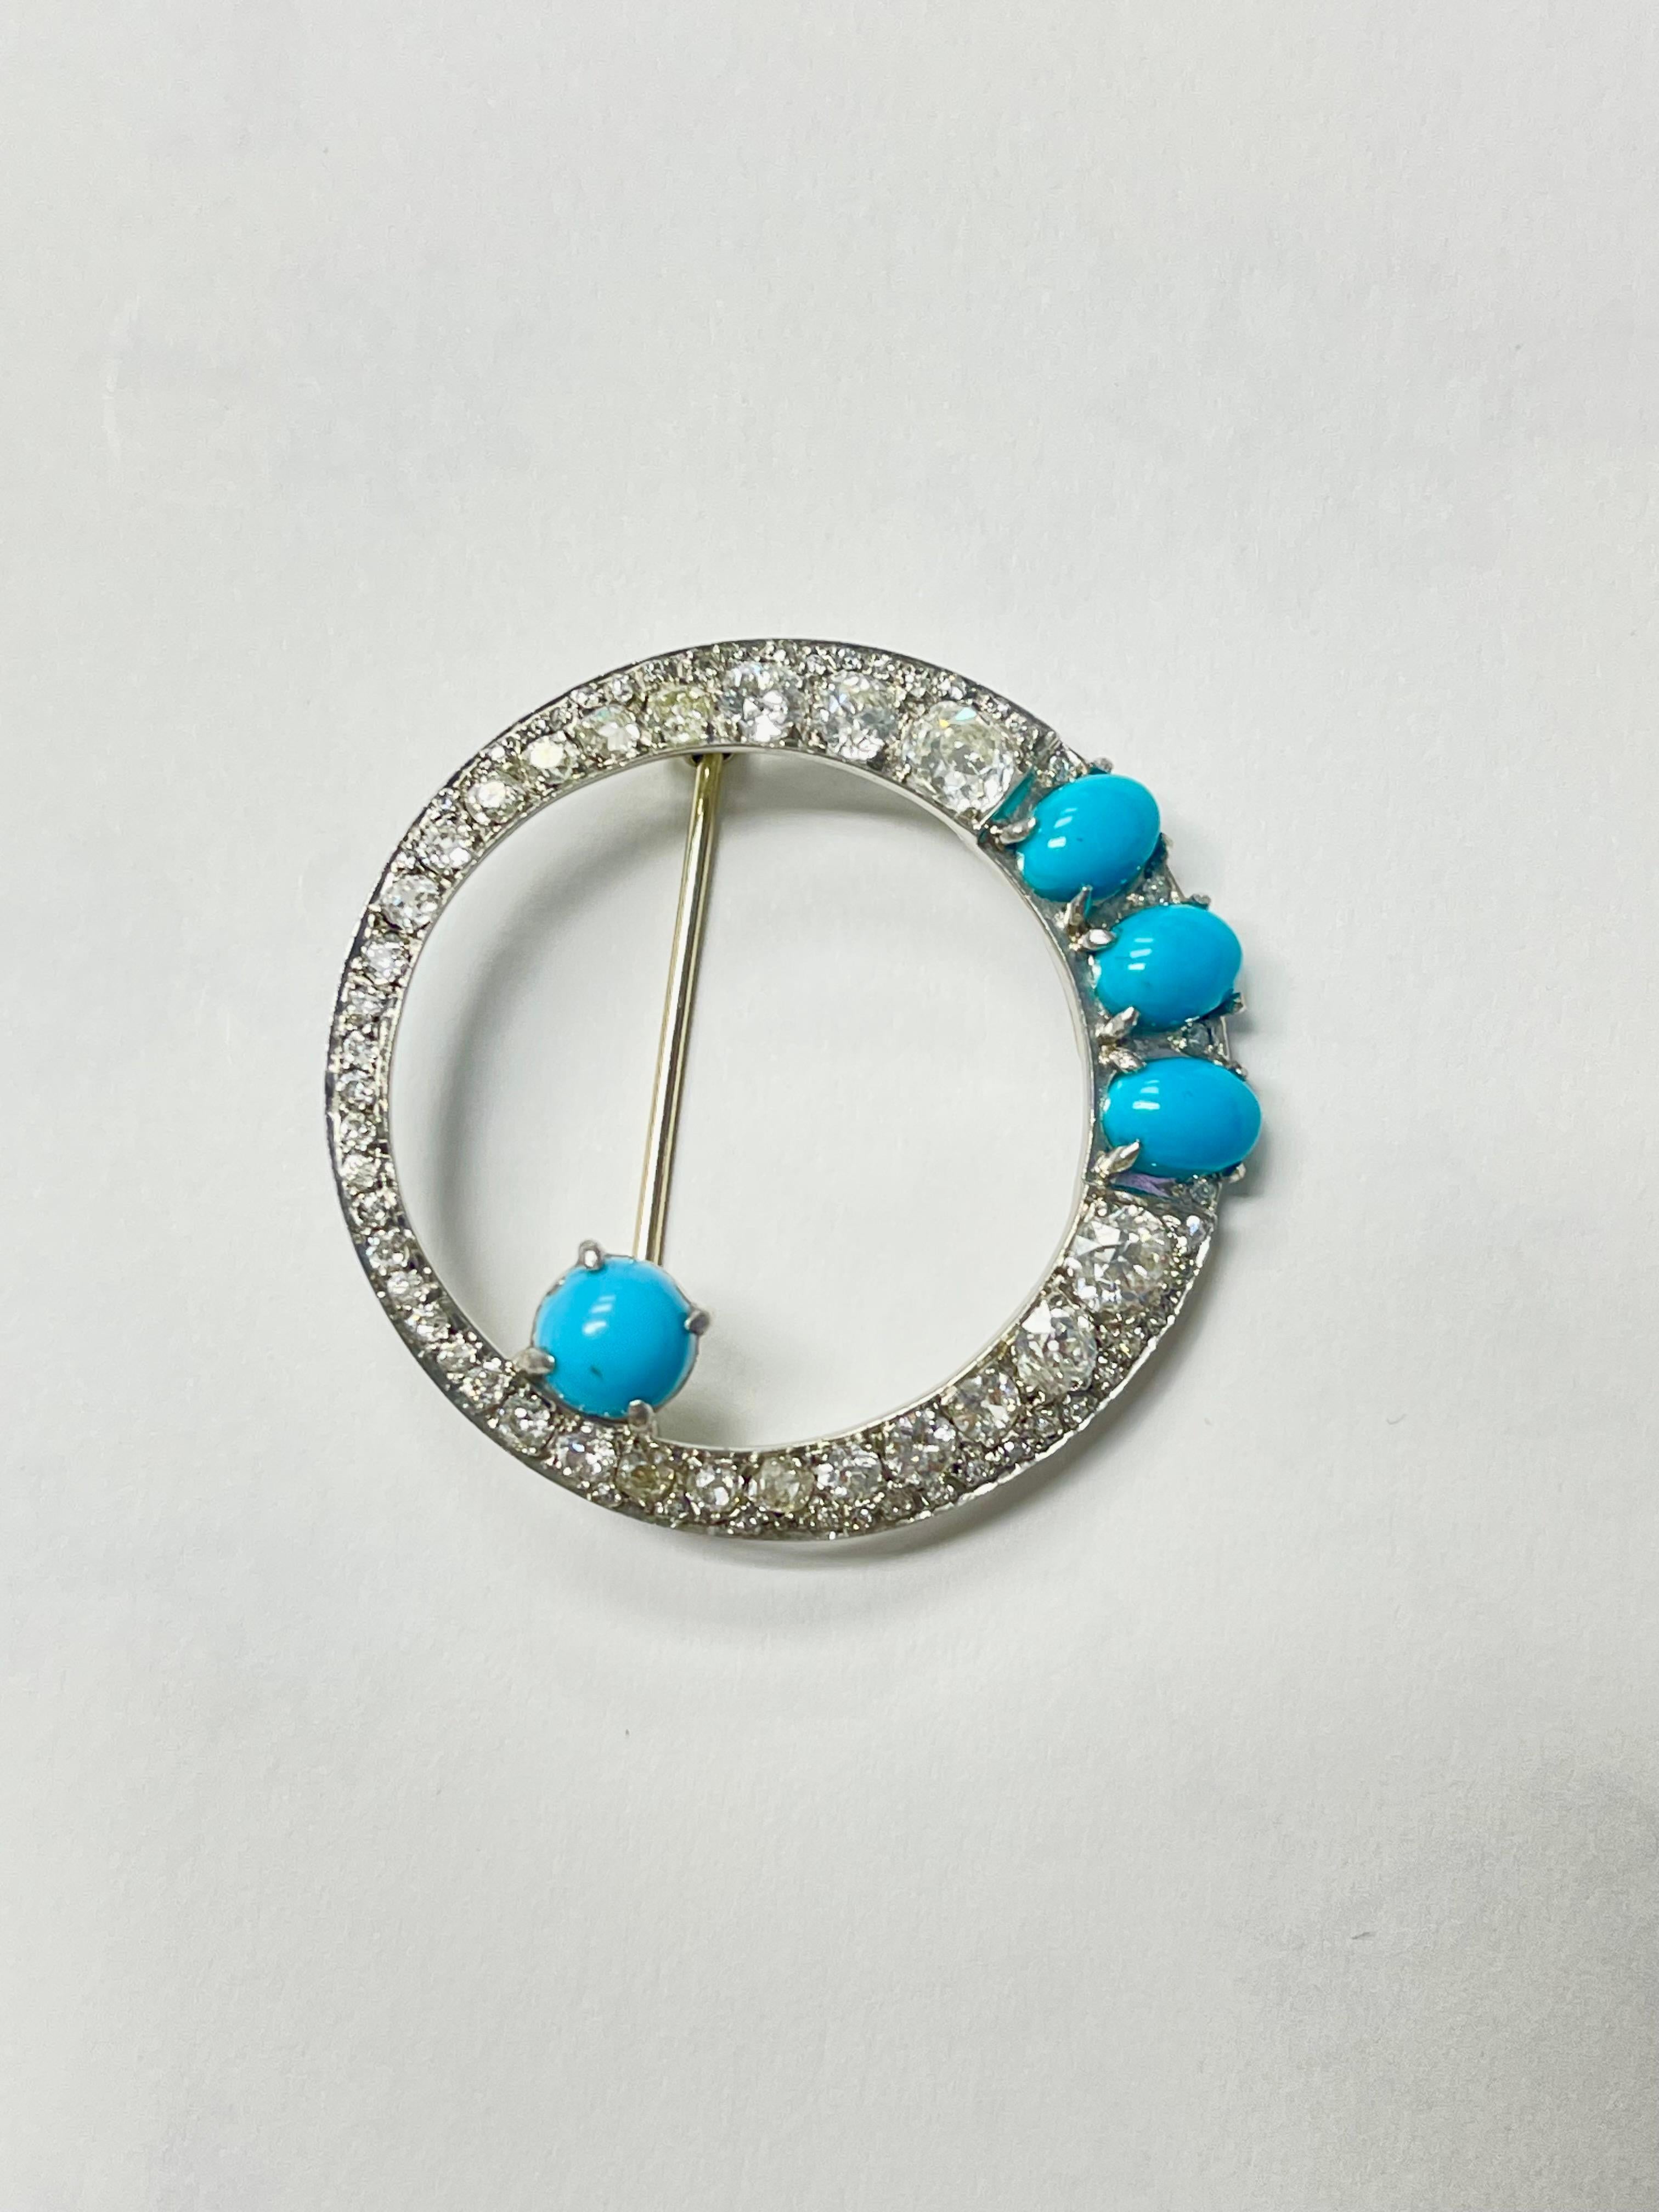 Old Mine Cut 1940 Vintage White Old Cut Diamond And Turquoise Brooch In Platinum.  For Sale